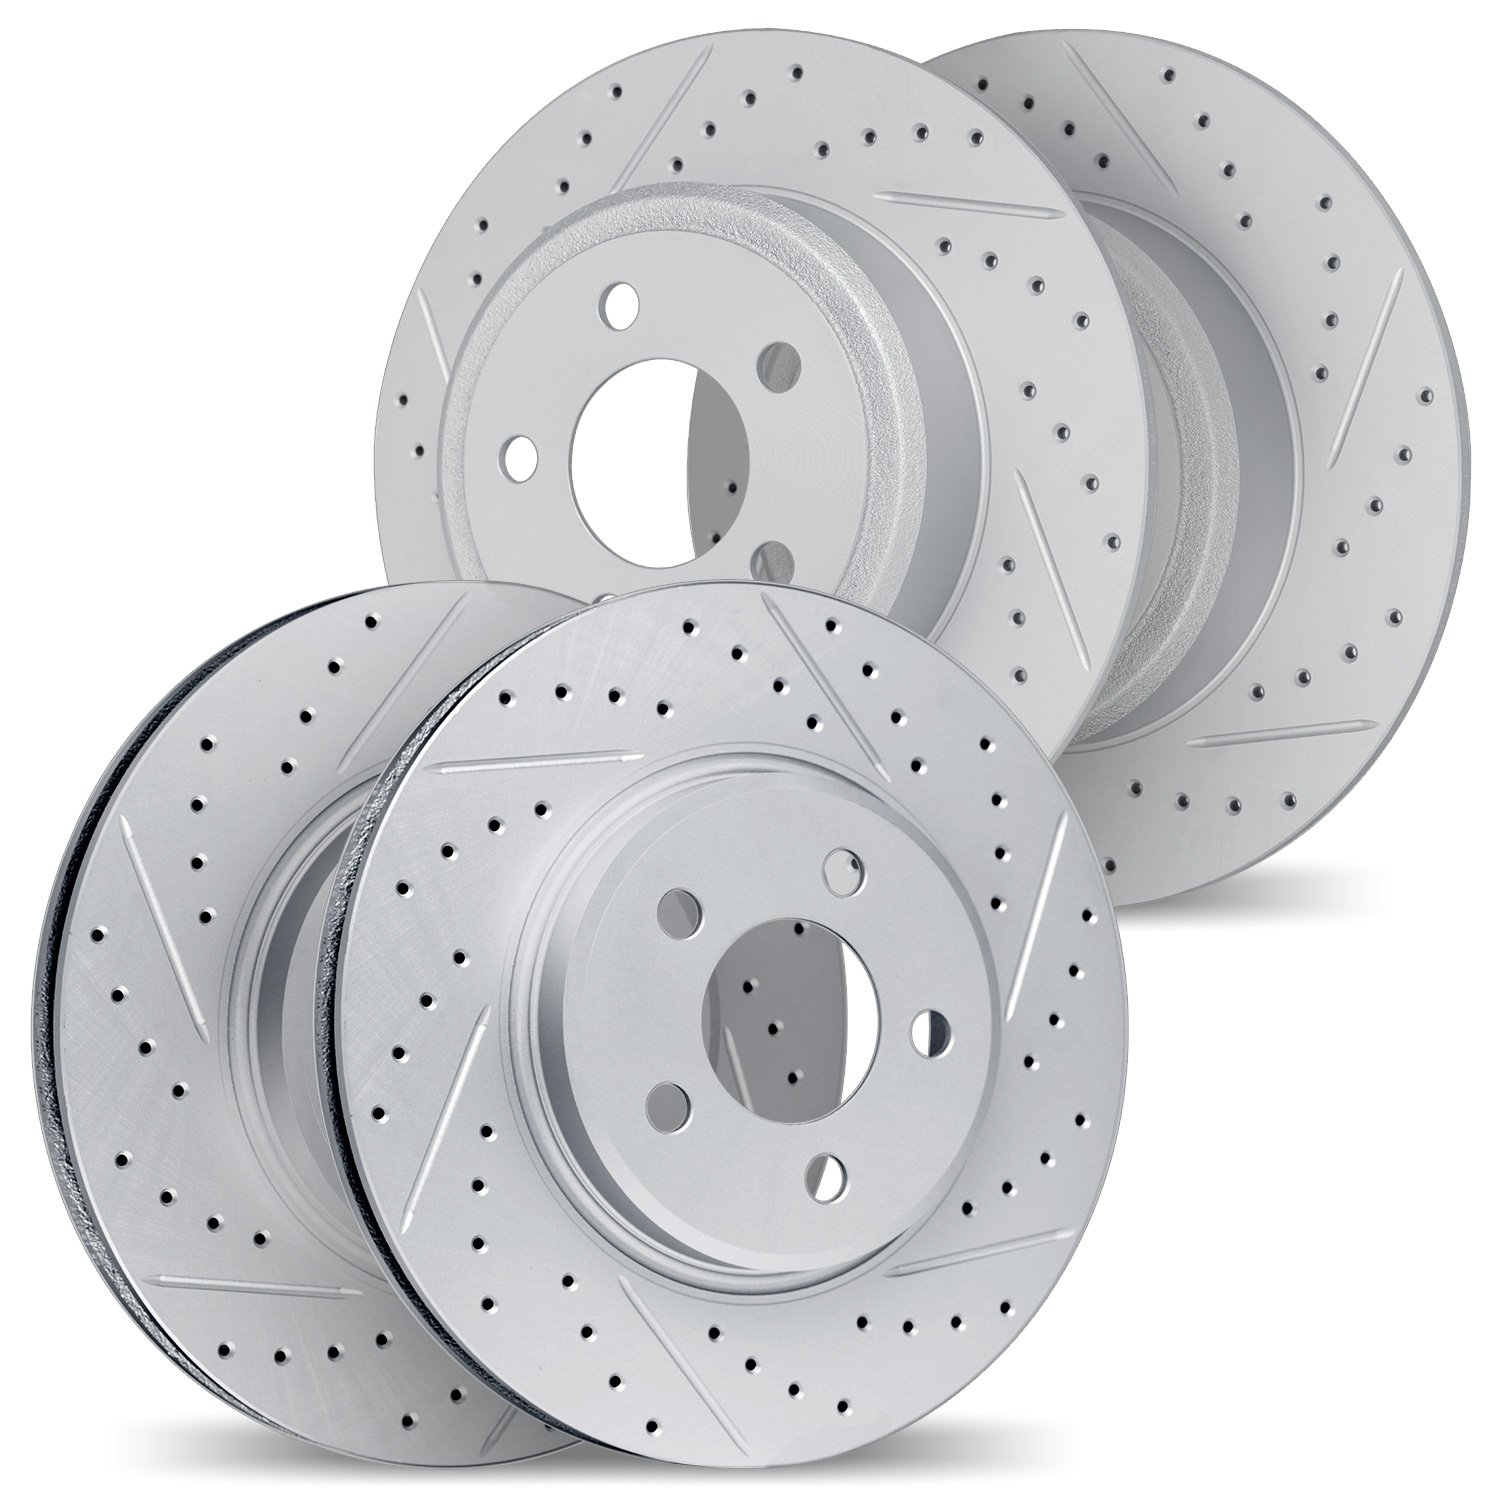 2004-03008 Geoperformance Drilled/Slotted Brake Rotors, 2018-2020 Kia/Hyundai/Genesis, Position: Front and Rear